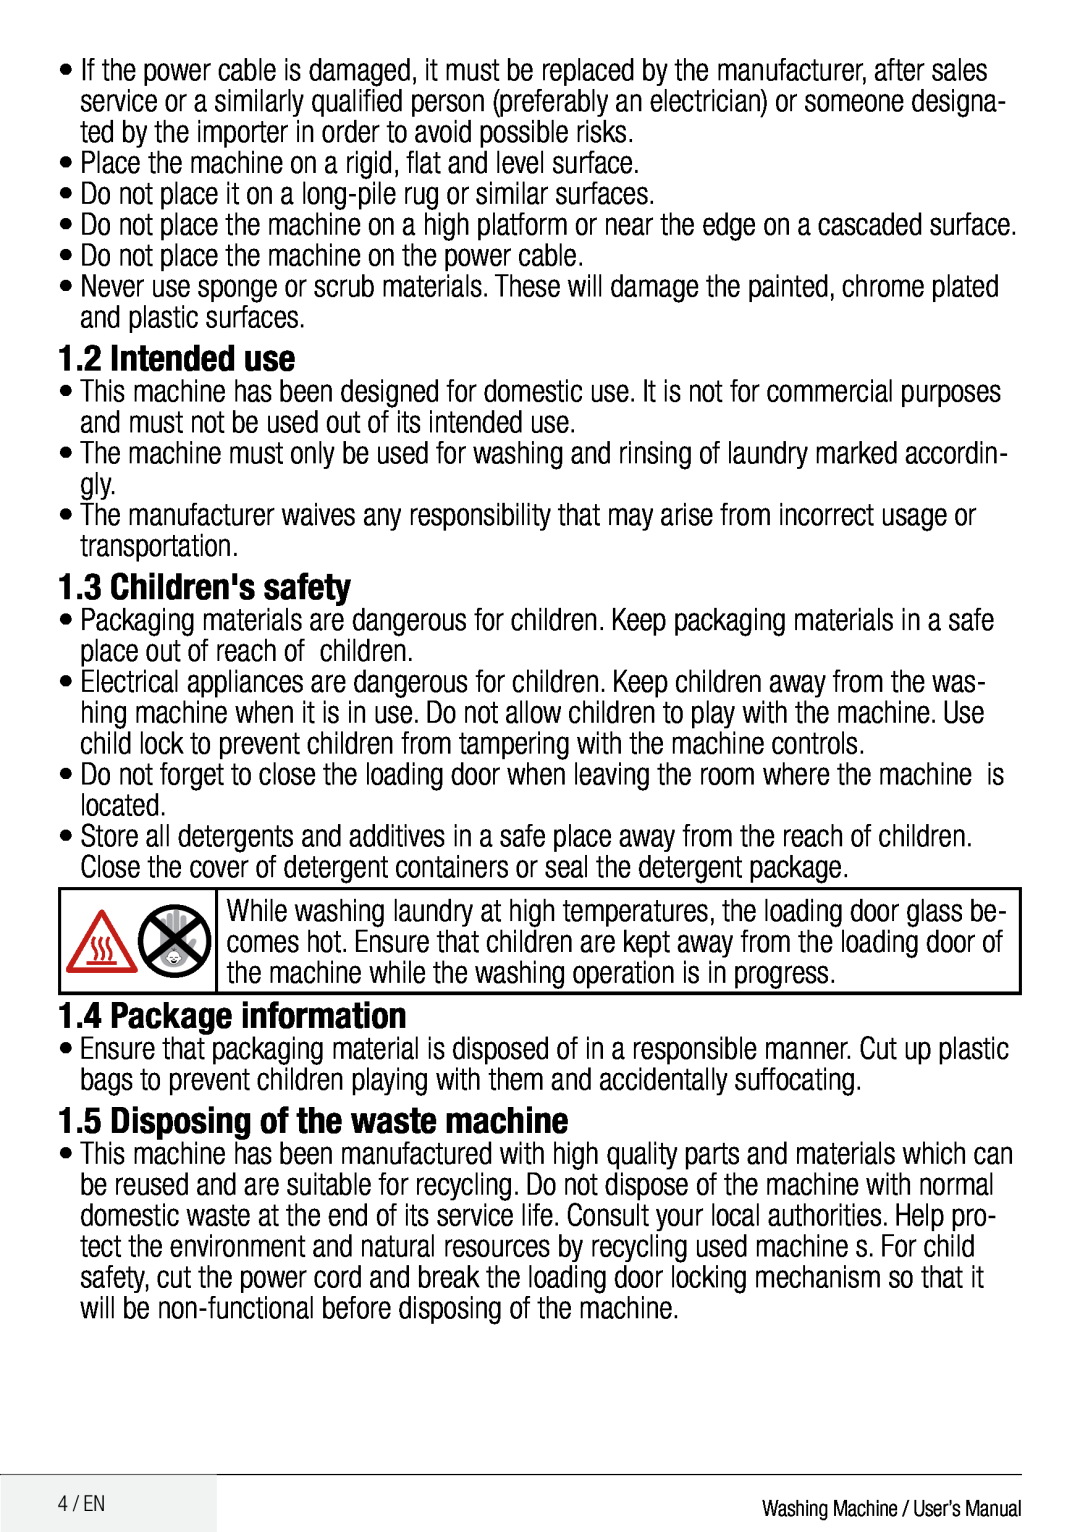 Defy Appliances WMY 81443 MLCM manual Intended use, Childrens safety, Package information, Disposing of the waste machine 